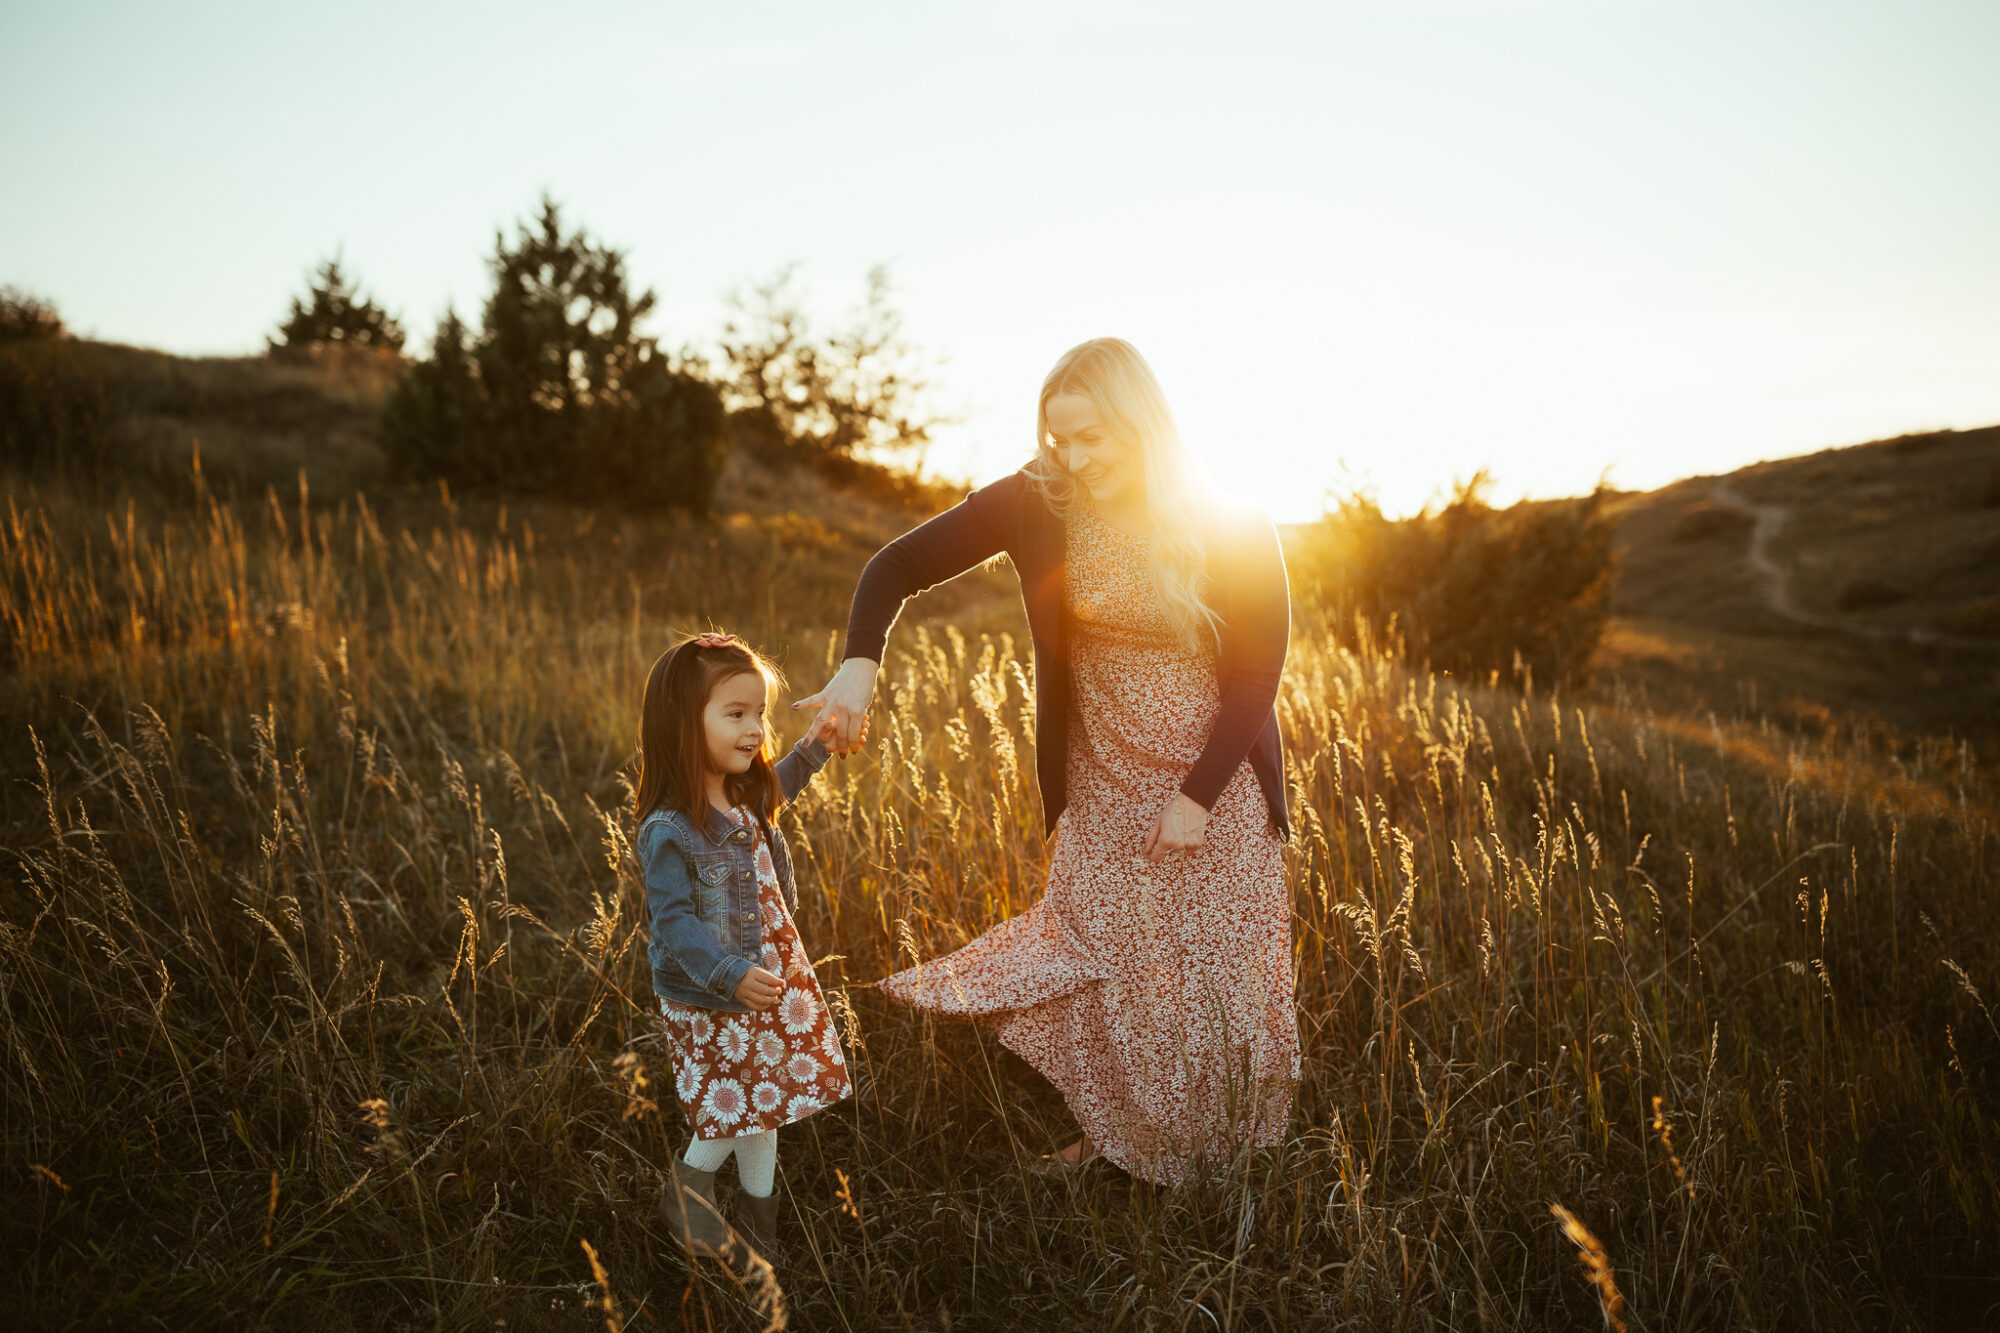 mom and daughter dancing on a grassy hill at sunset
